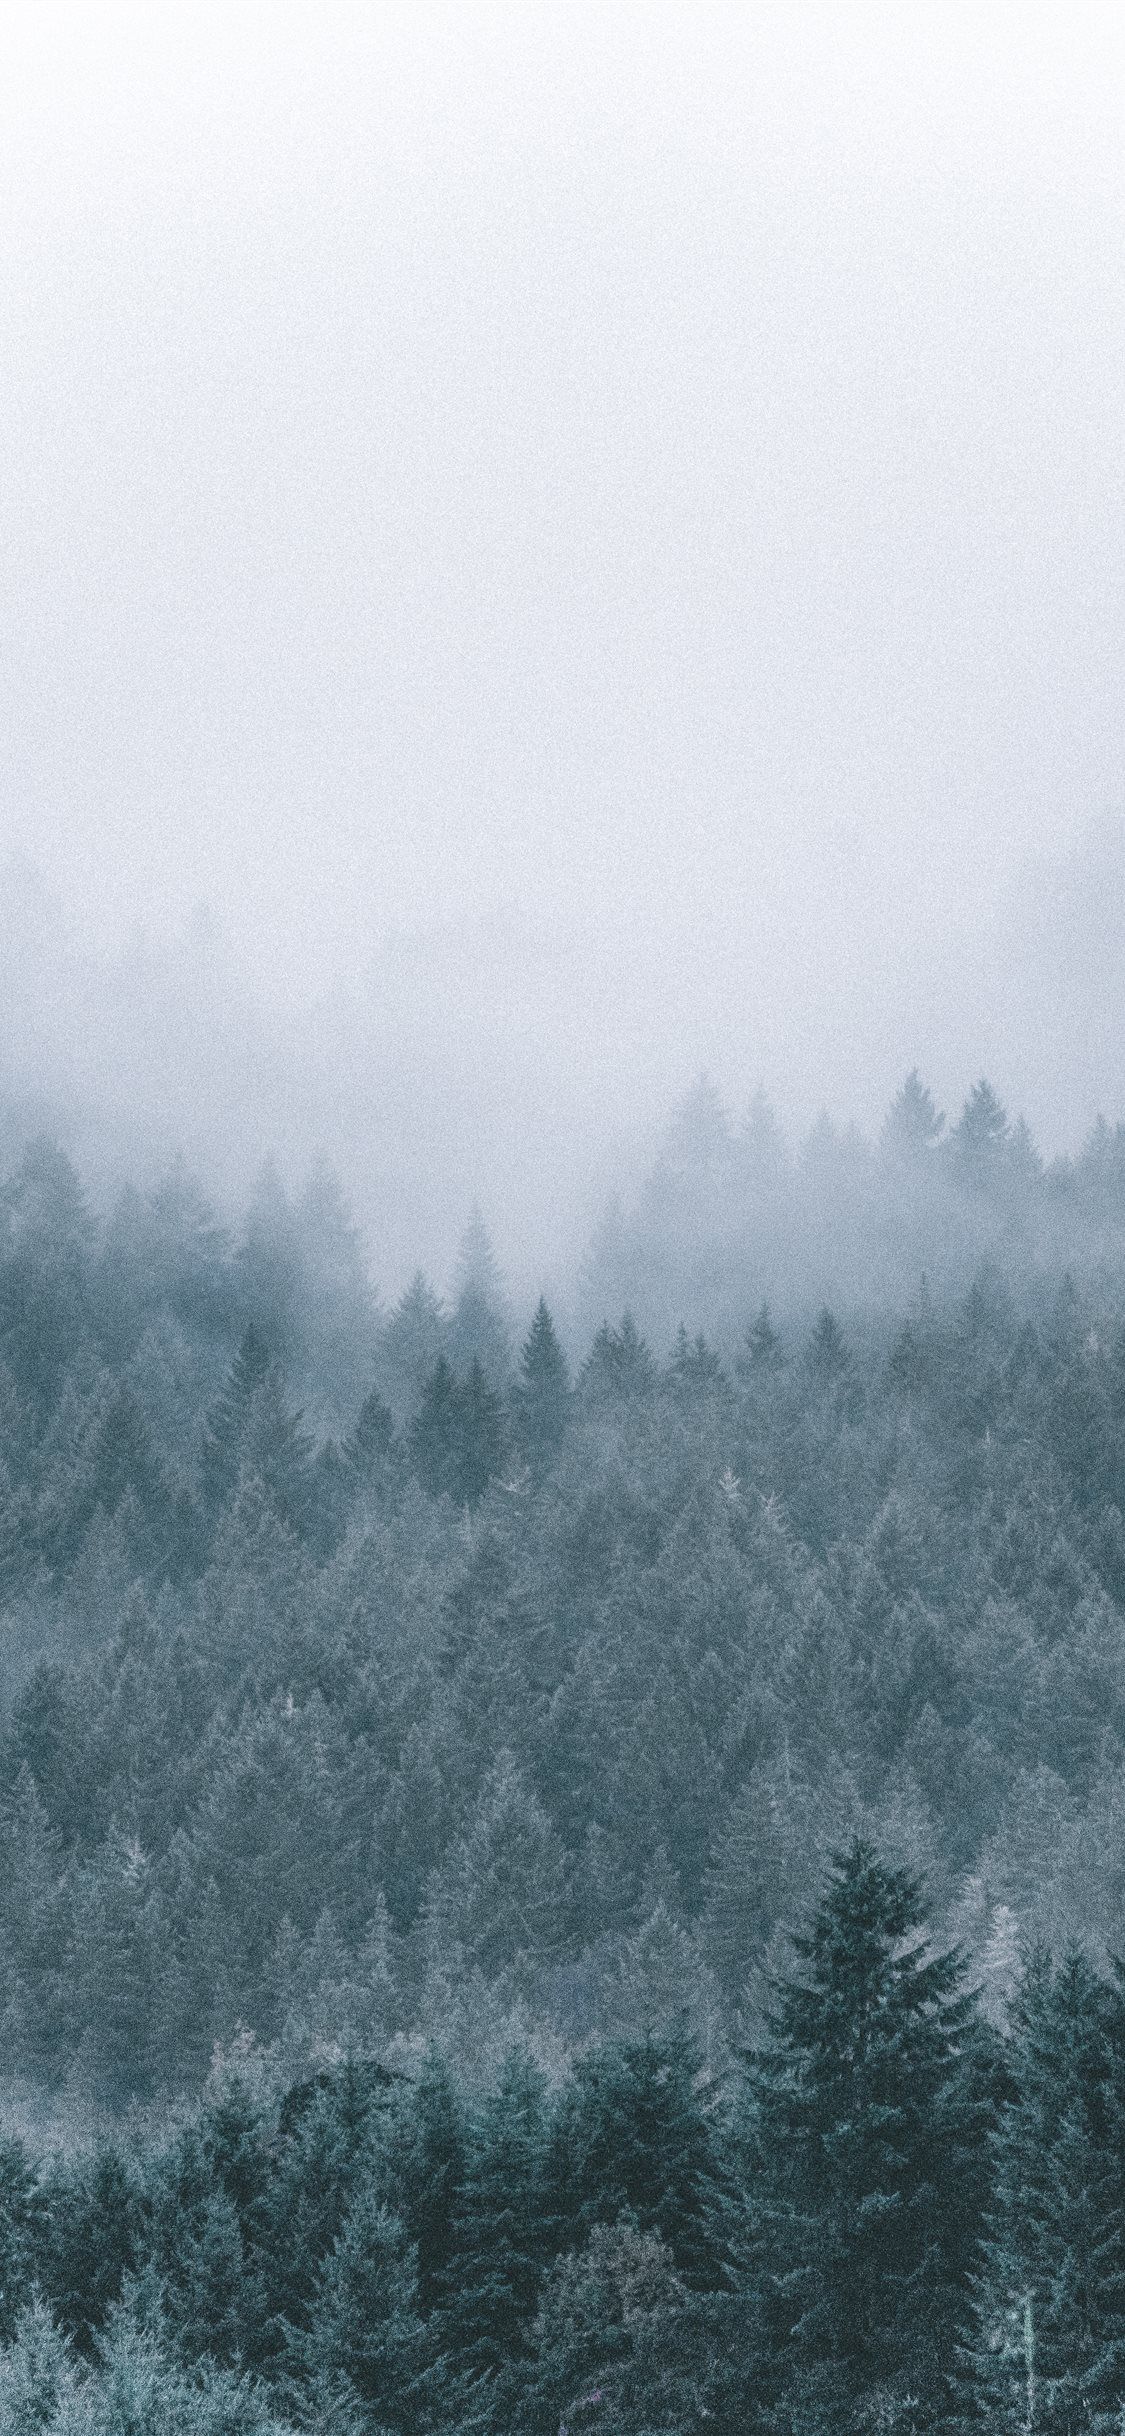 A man riding his bicycle through the fog - Foggy forest